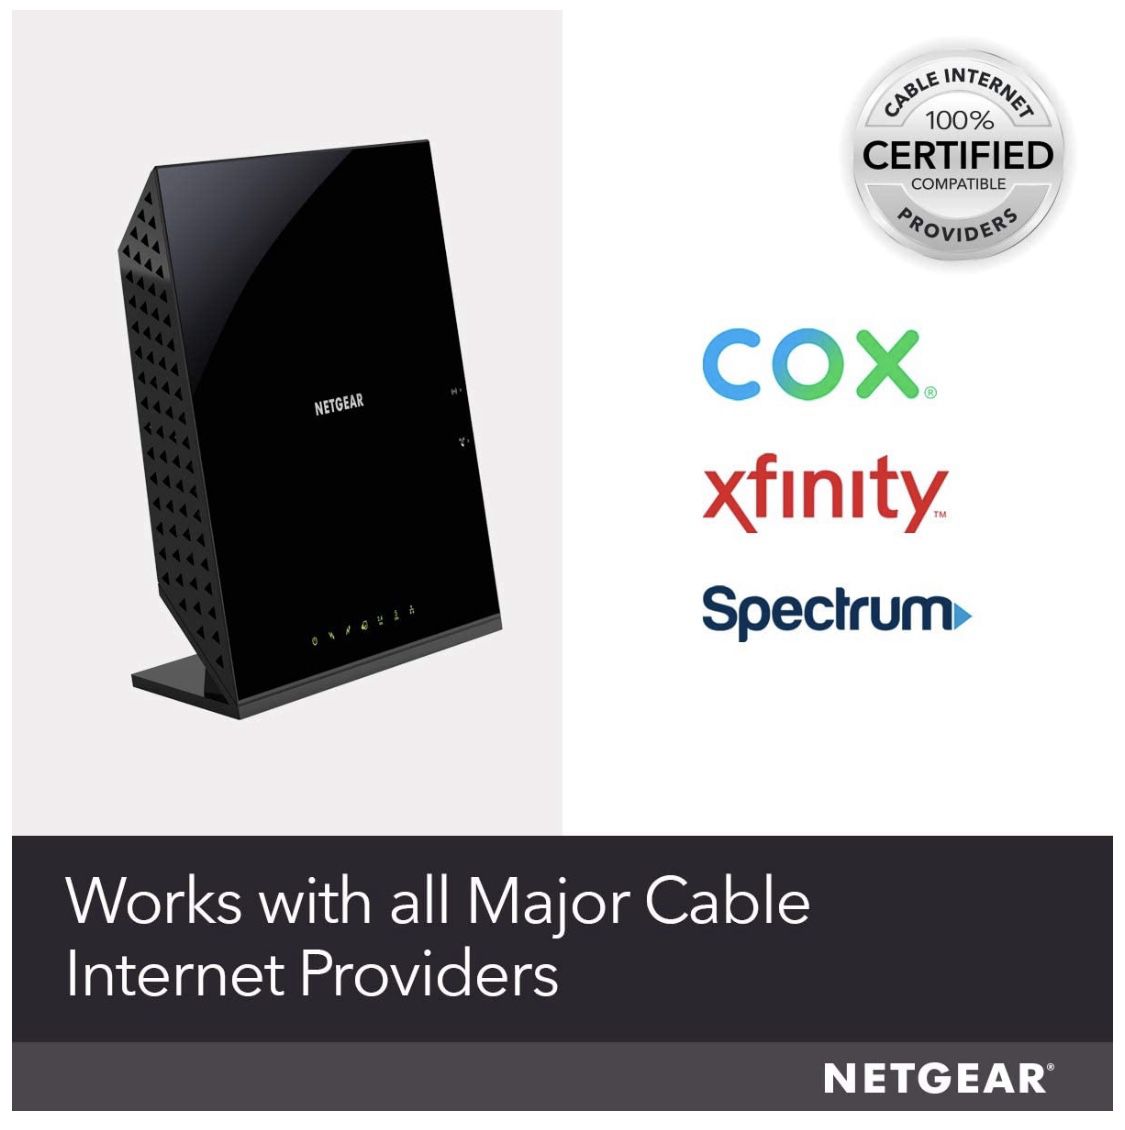 NETGEAR Modem & WiFi Router Combo C6250 - Compatible with all Cable Providers